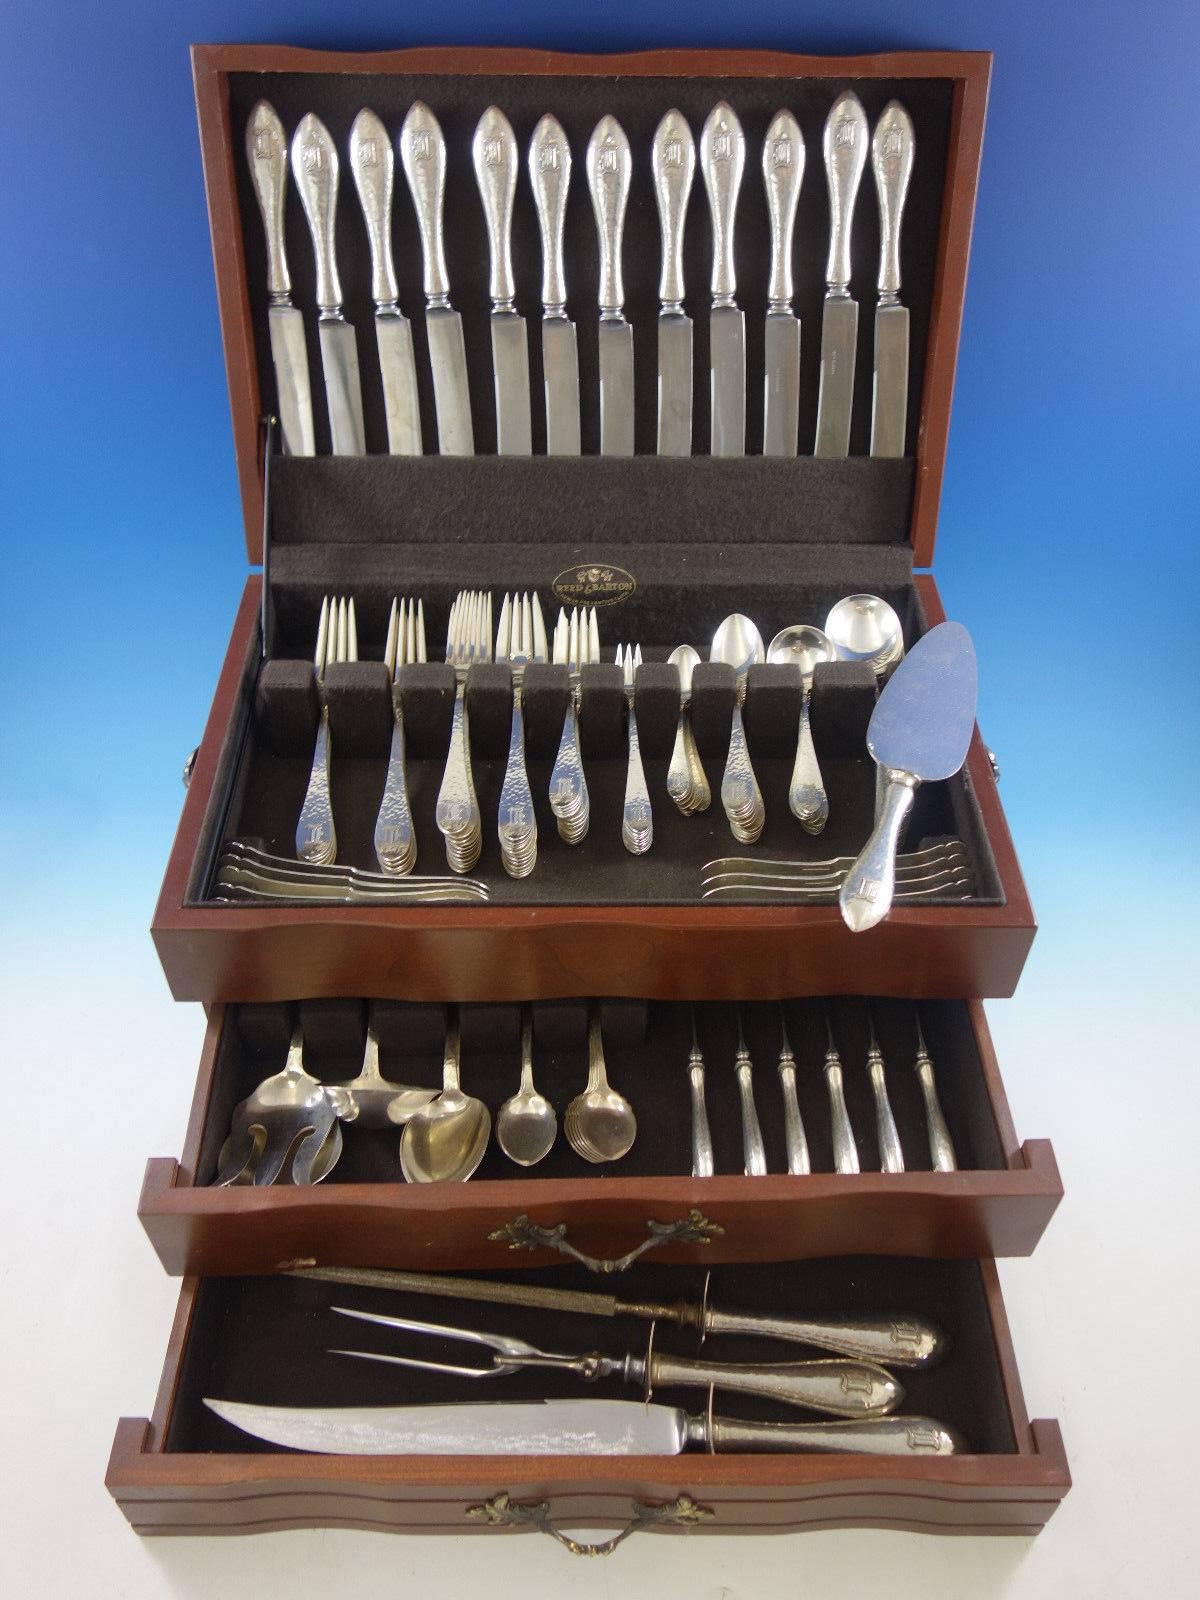 Dinner size antique hammered by Shreve handmade sterling silver flatware set 158 pieces. This set includes: 12 dinner knives, 9 3/4